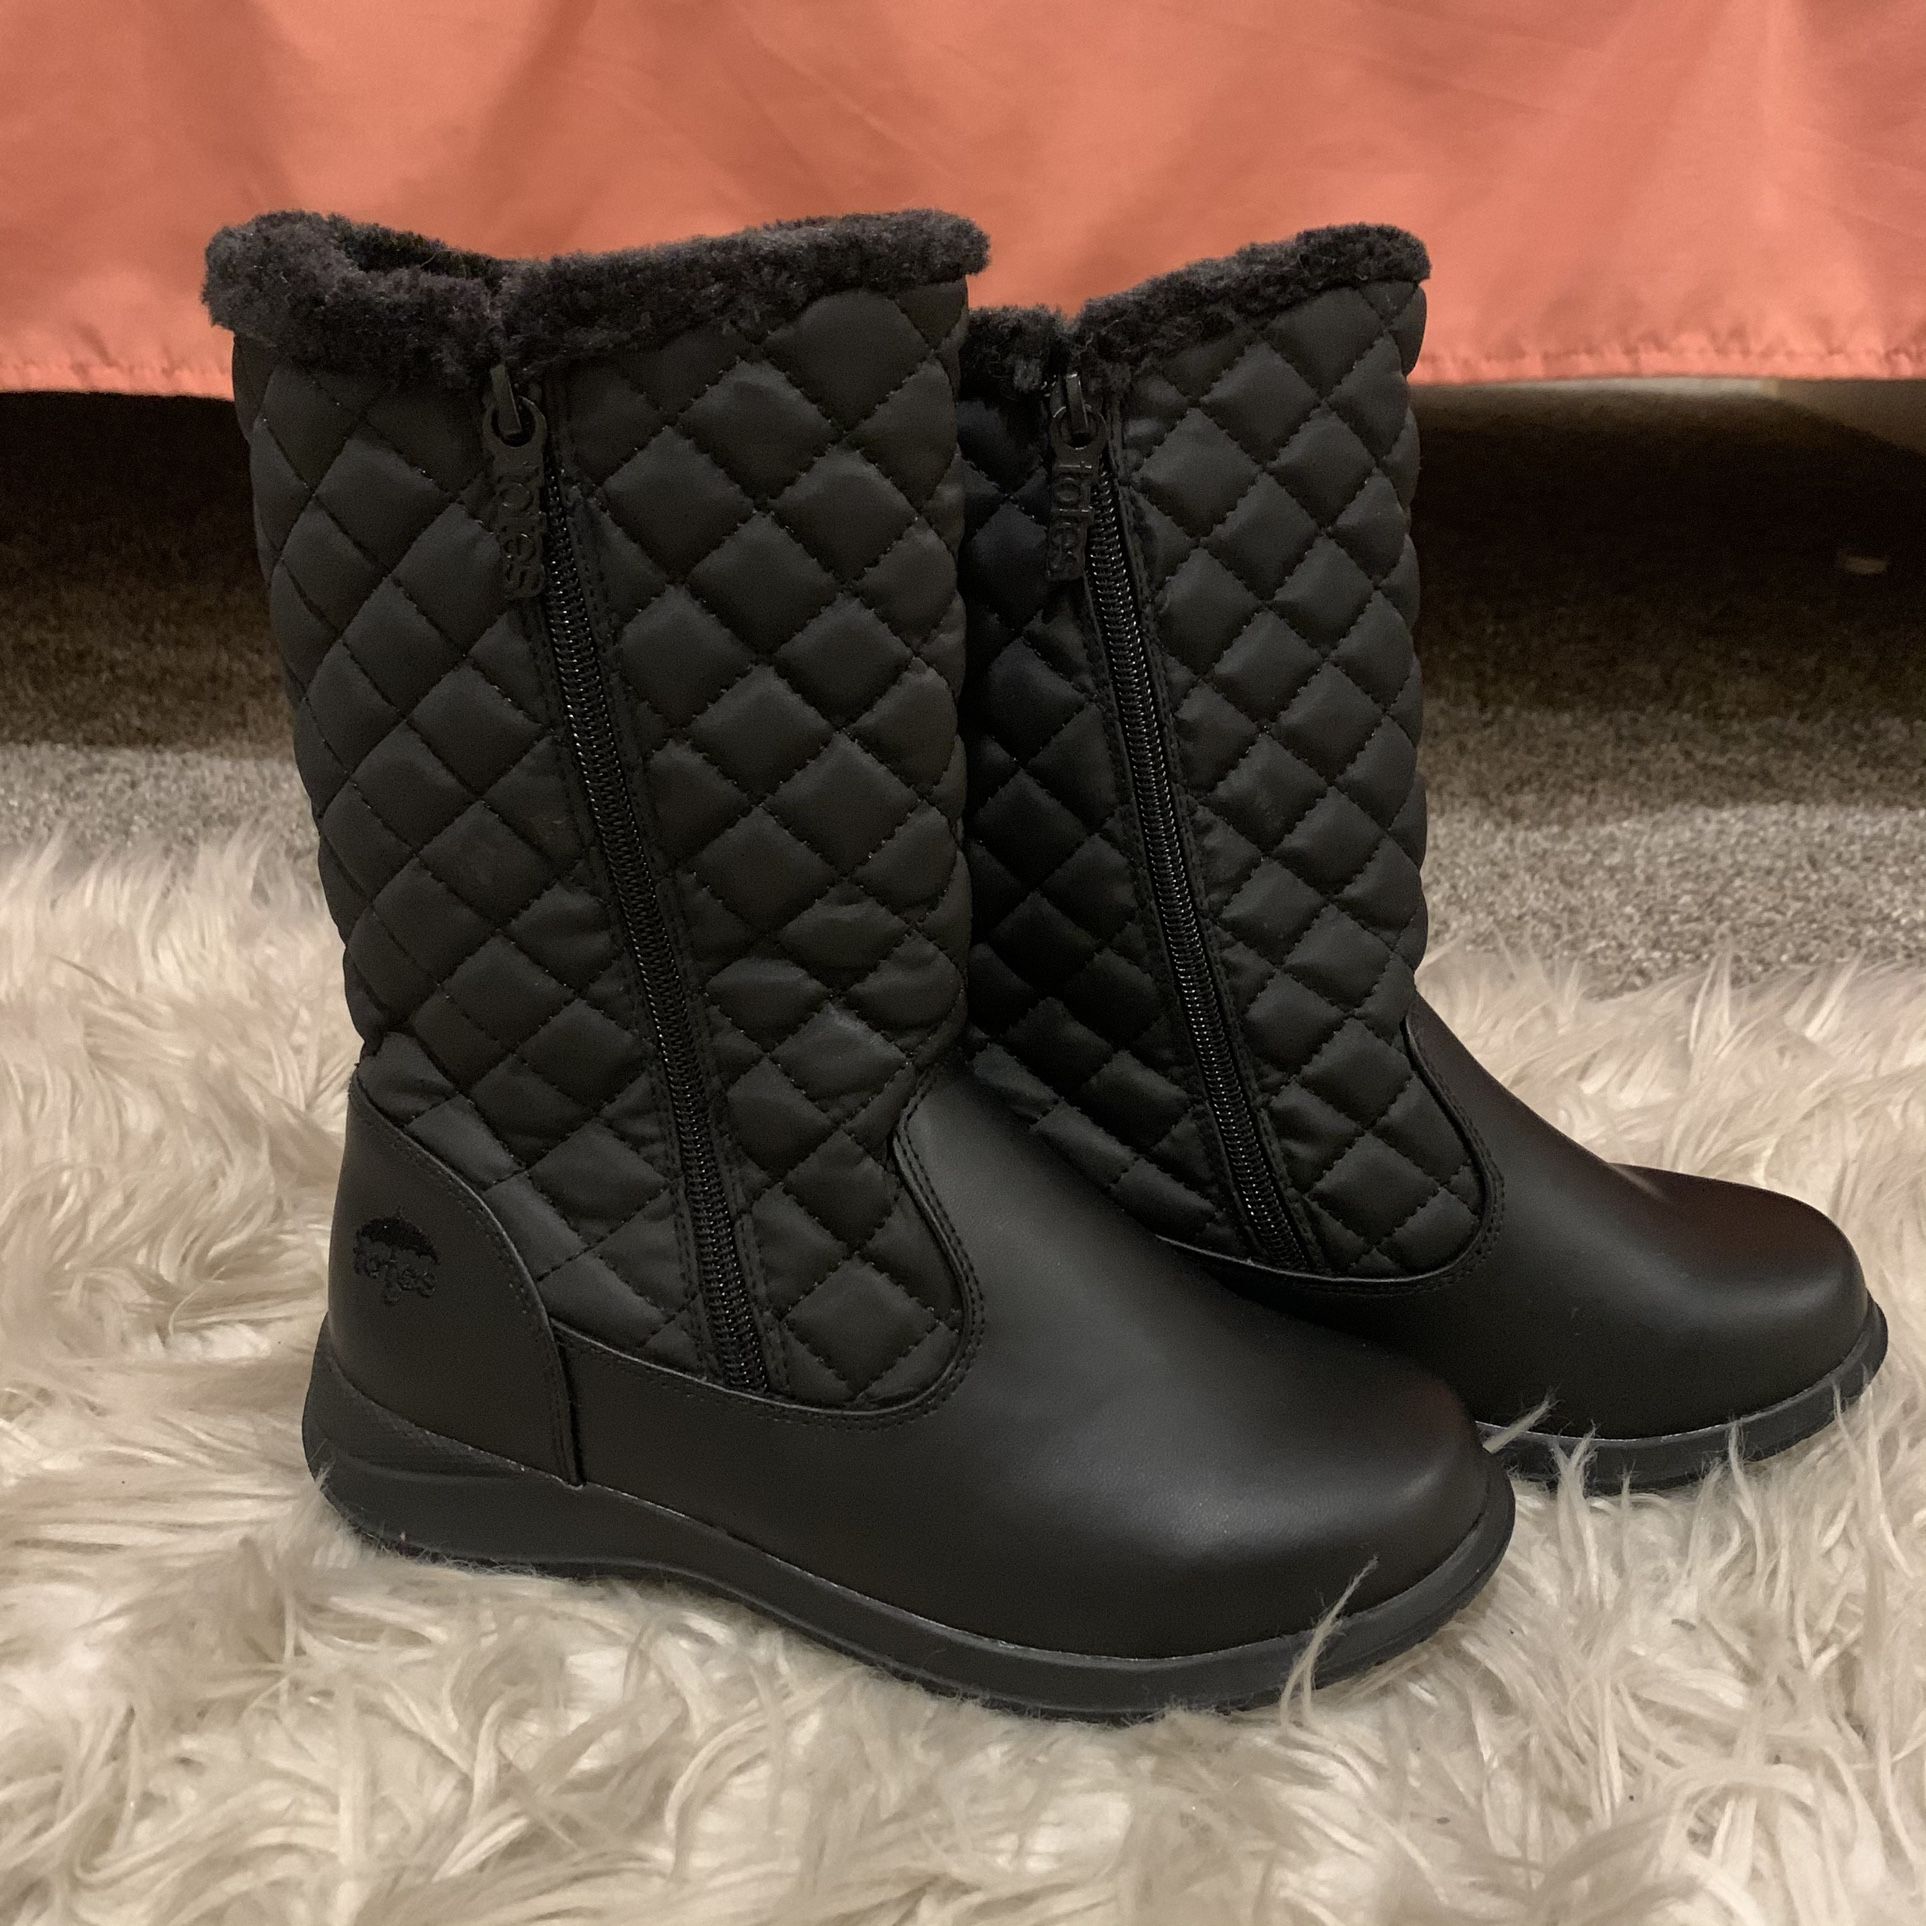 Totes All Weather Boots For Rain And Snow (Brand New) 